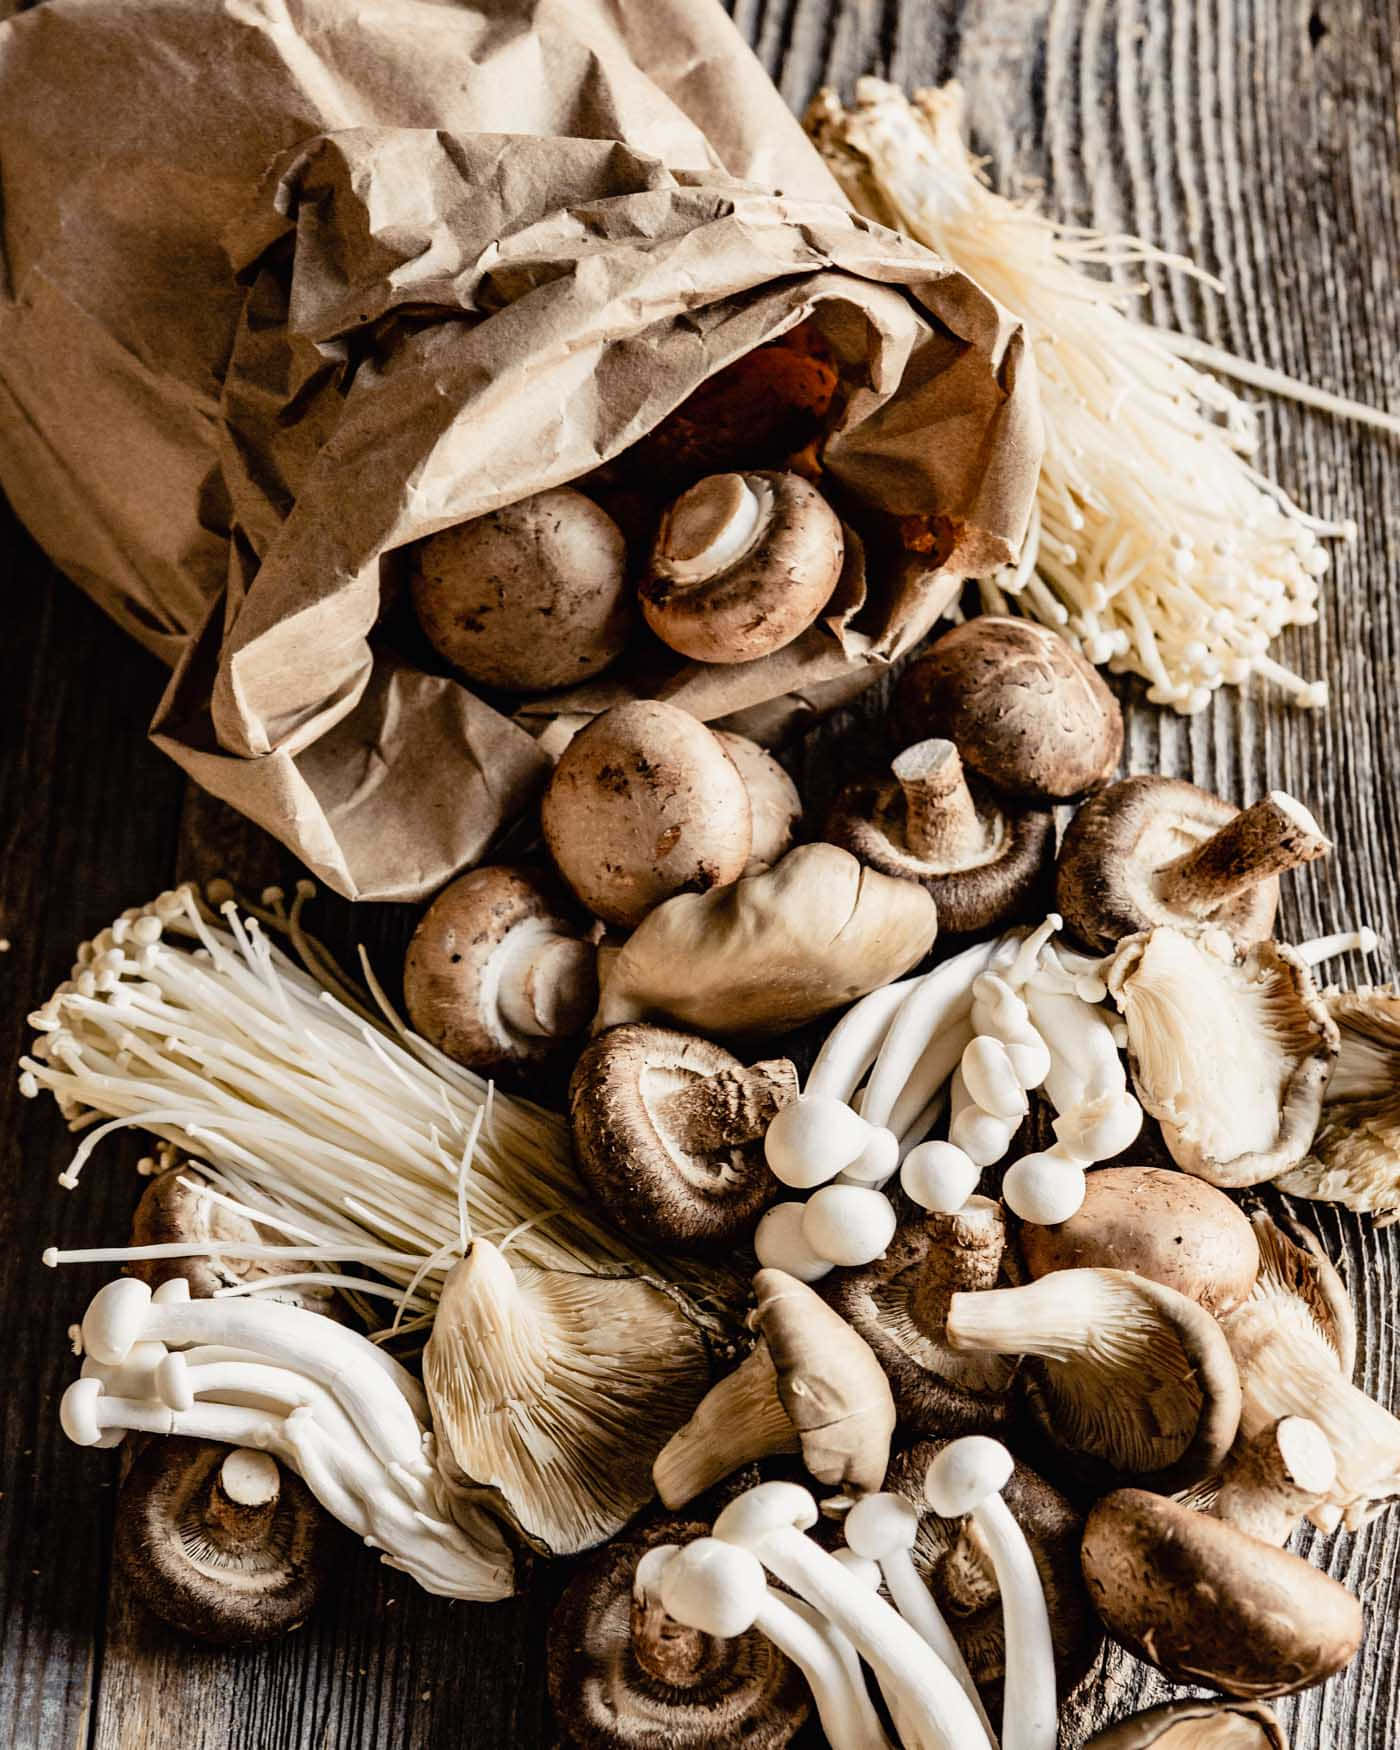 Caption: Assorted Variety of Edible Mushrooms